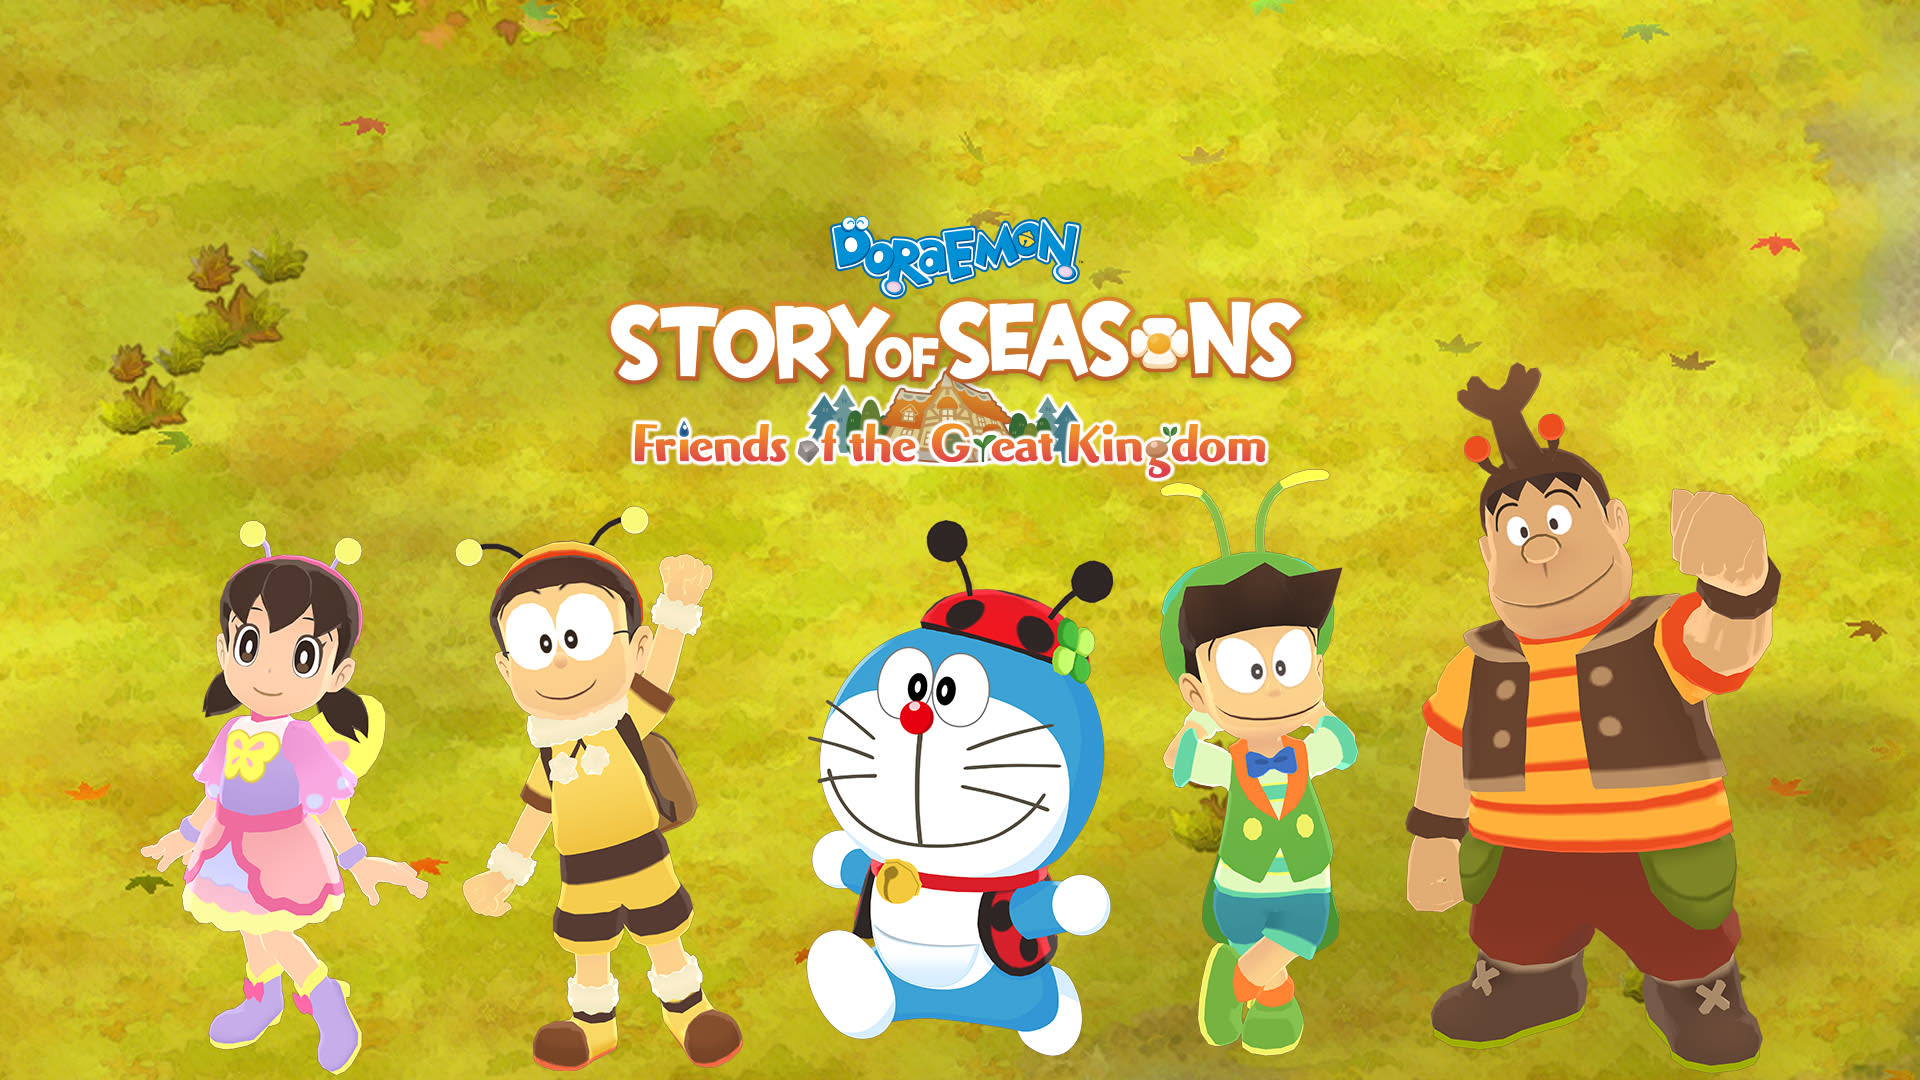 DORAEMON STORY OF SEASONS: FGK - The Life of Insects 1